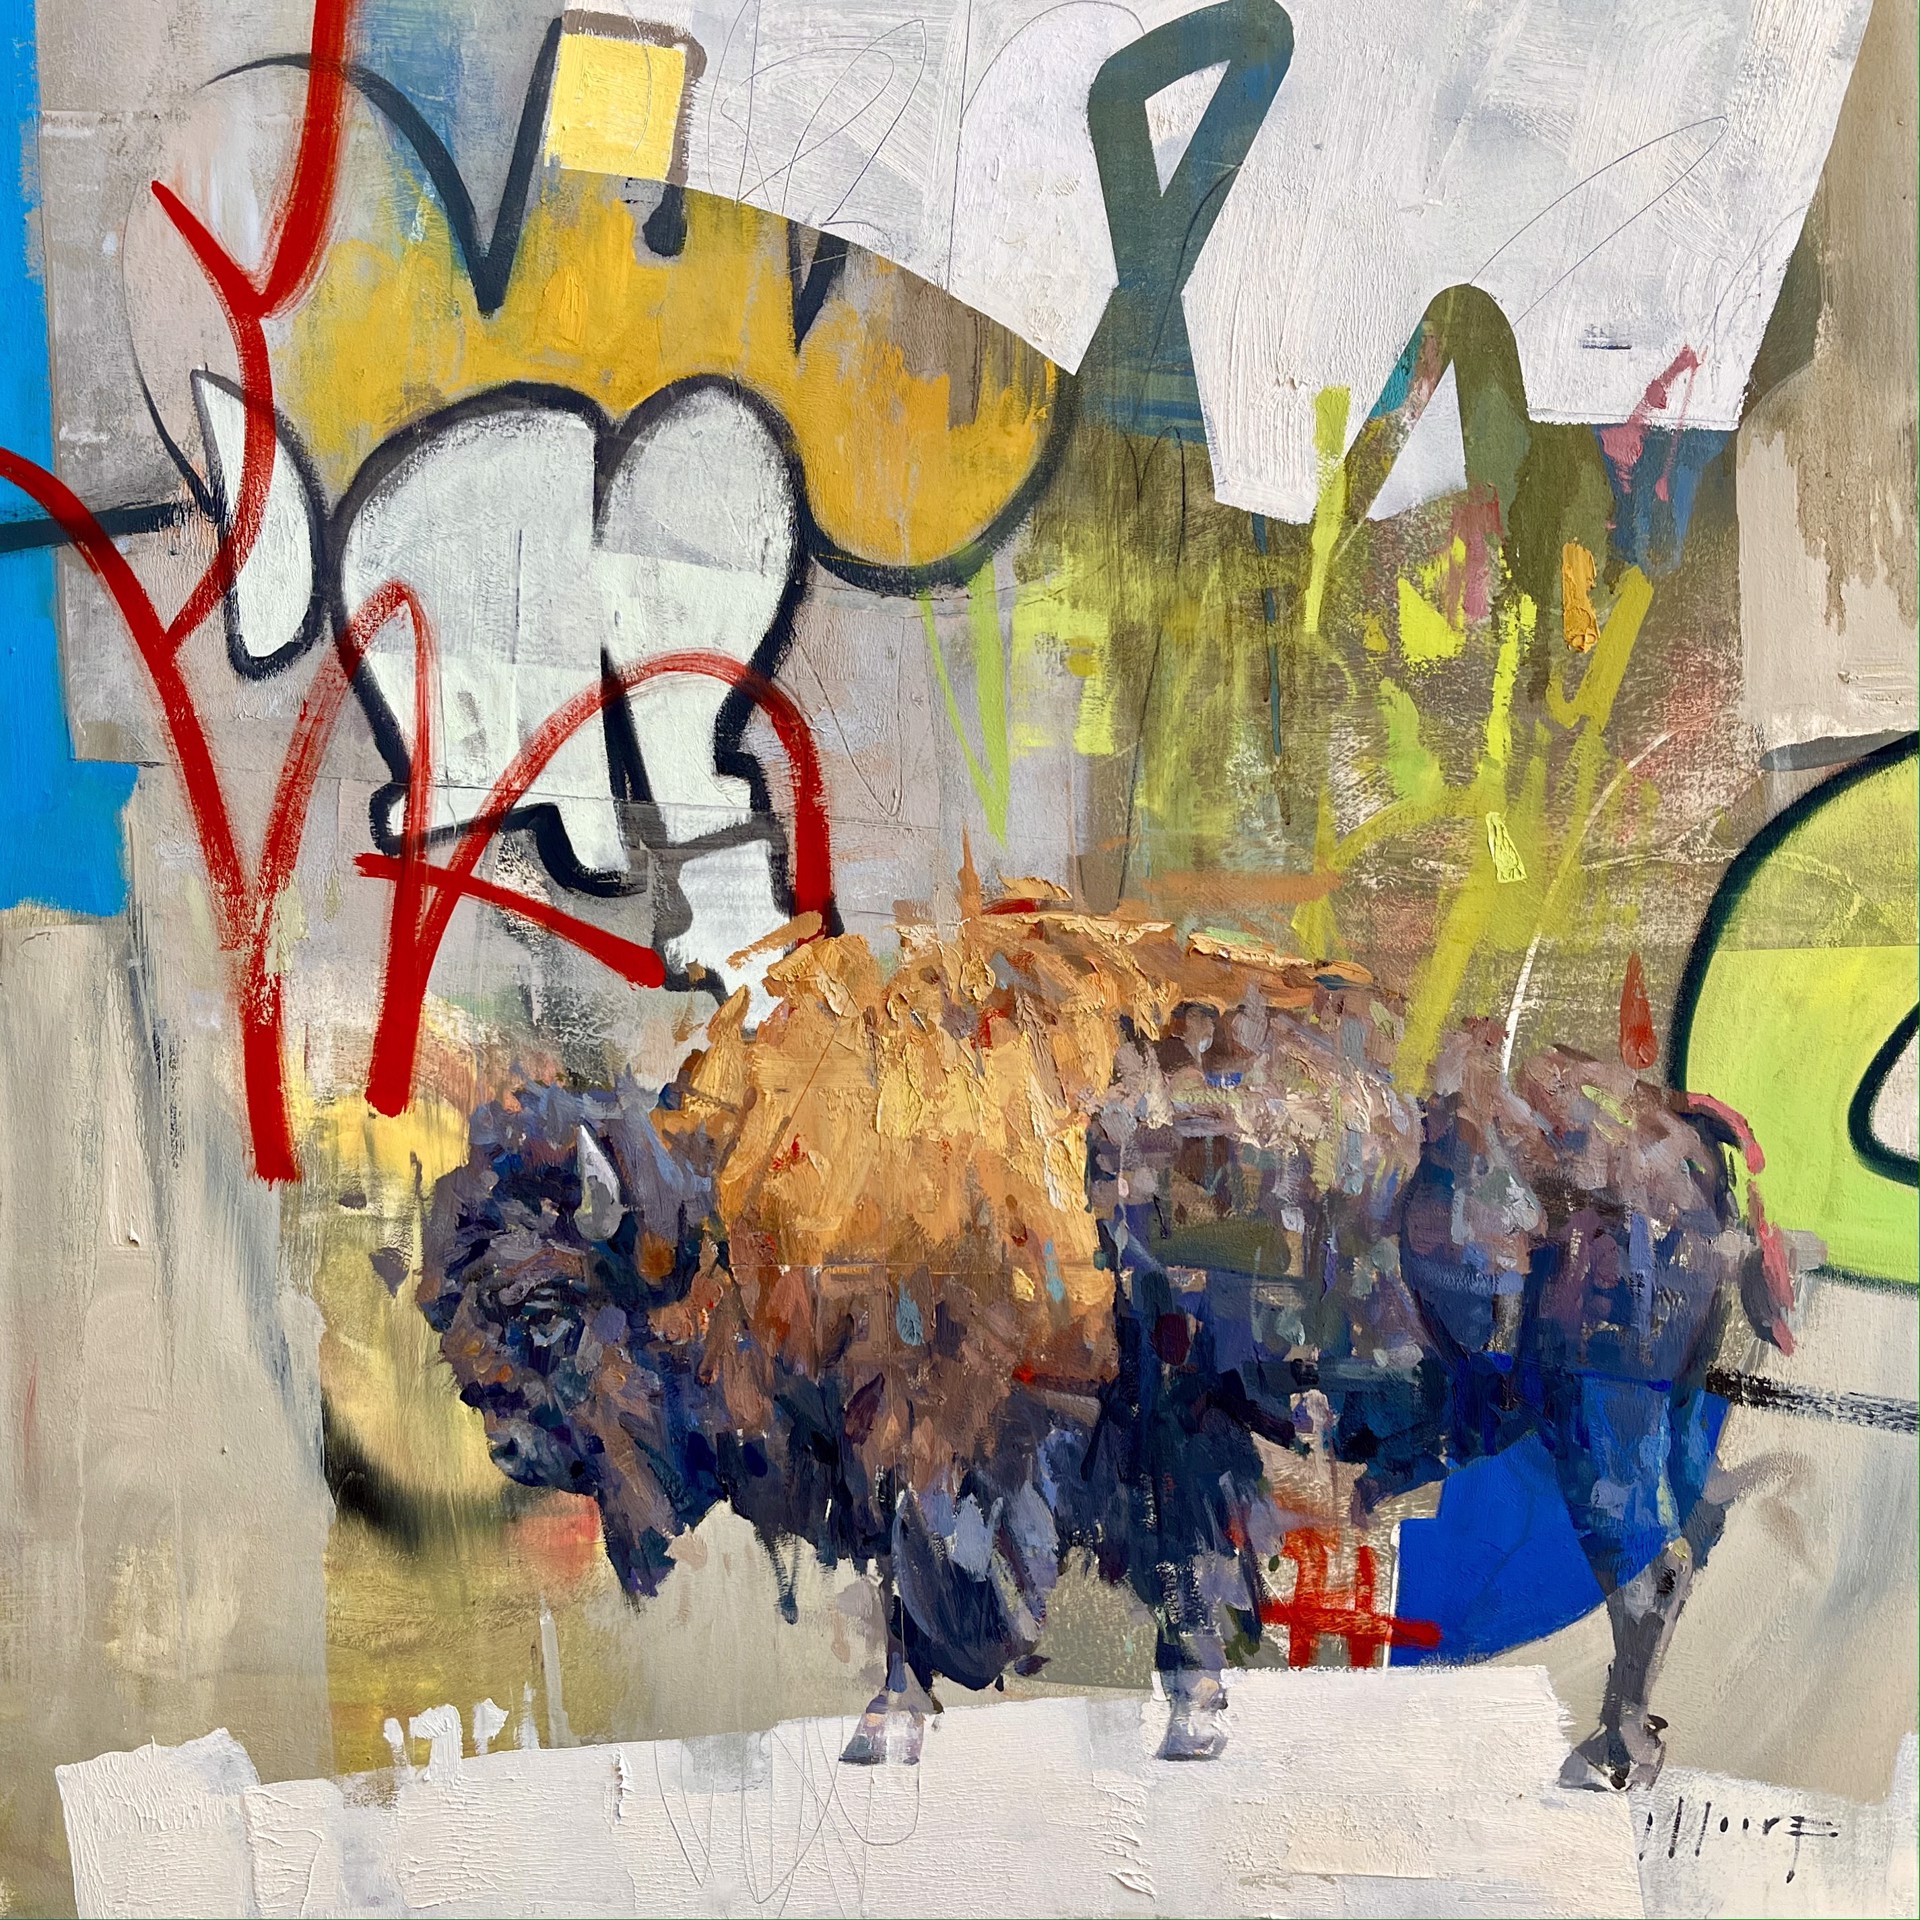 An Oil Painting Of A Bison Walking With An Abstract Graffiti Style Background, By Larry Moore